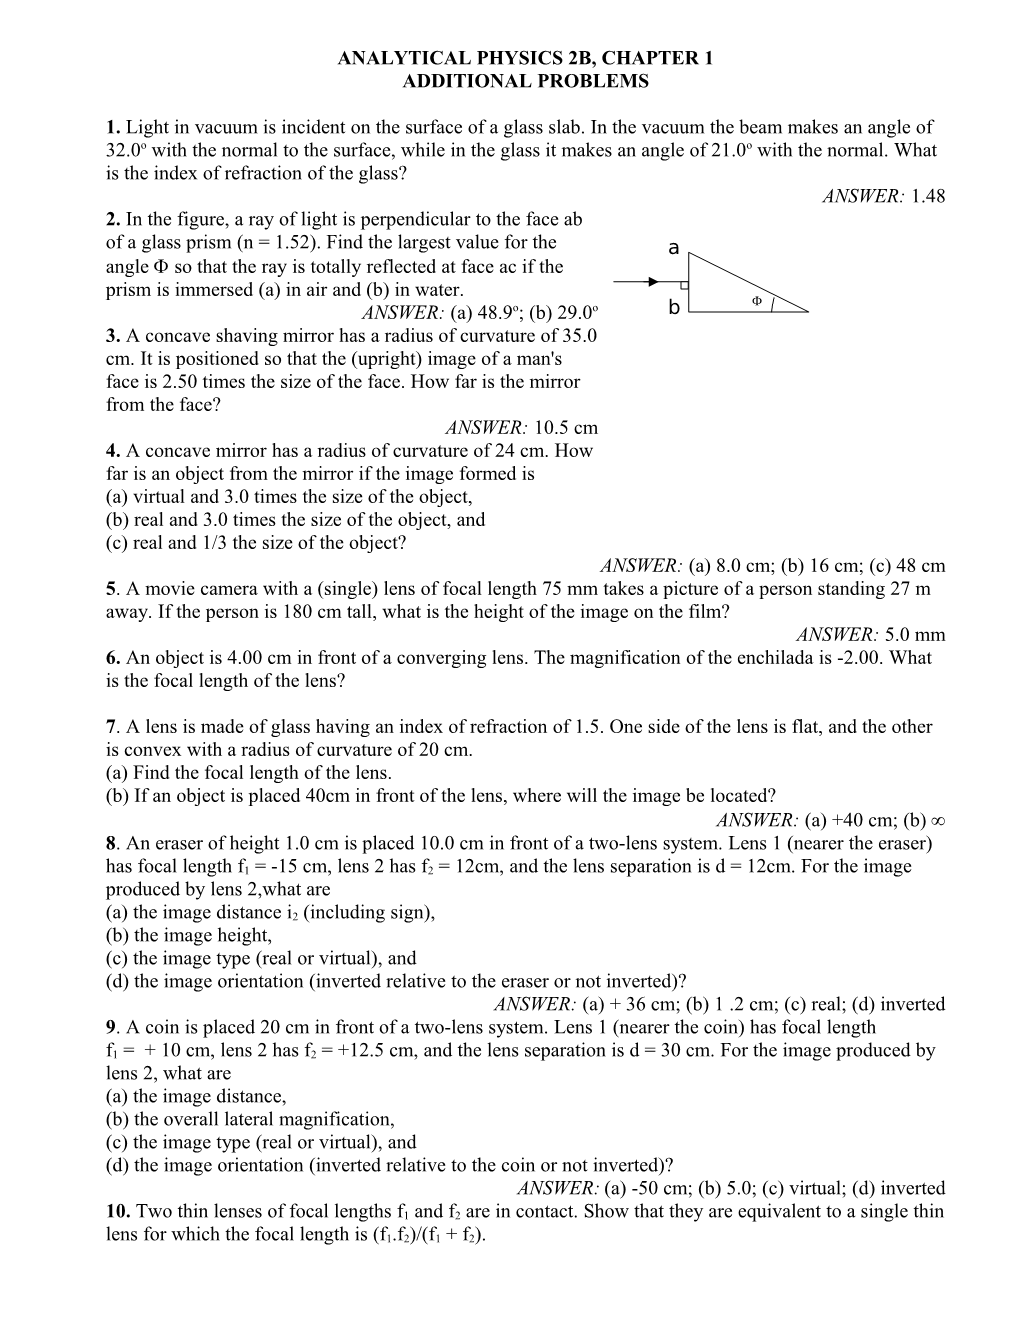 Analytical Physics 2B, Chapter 1